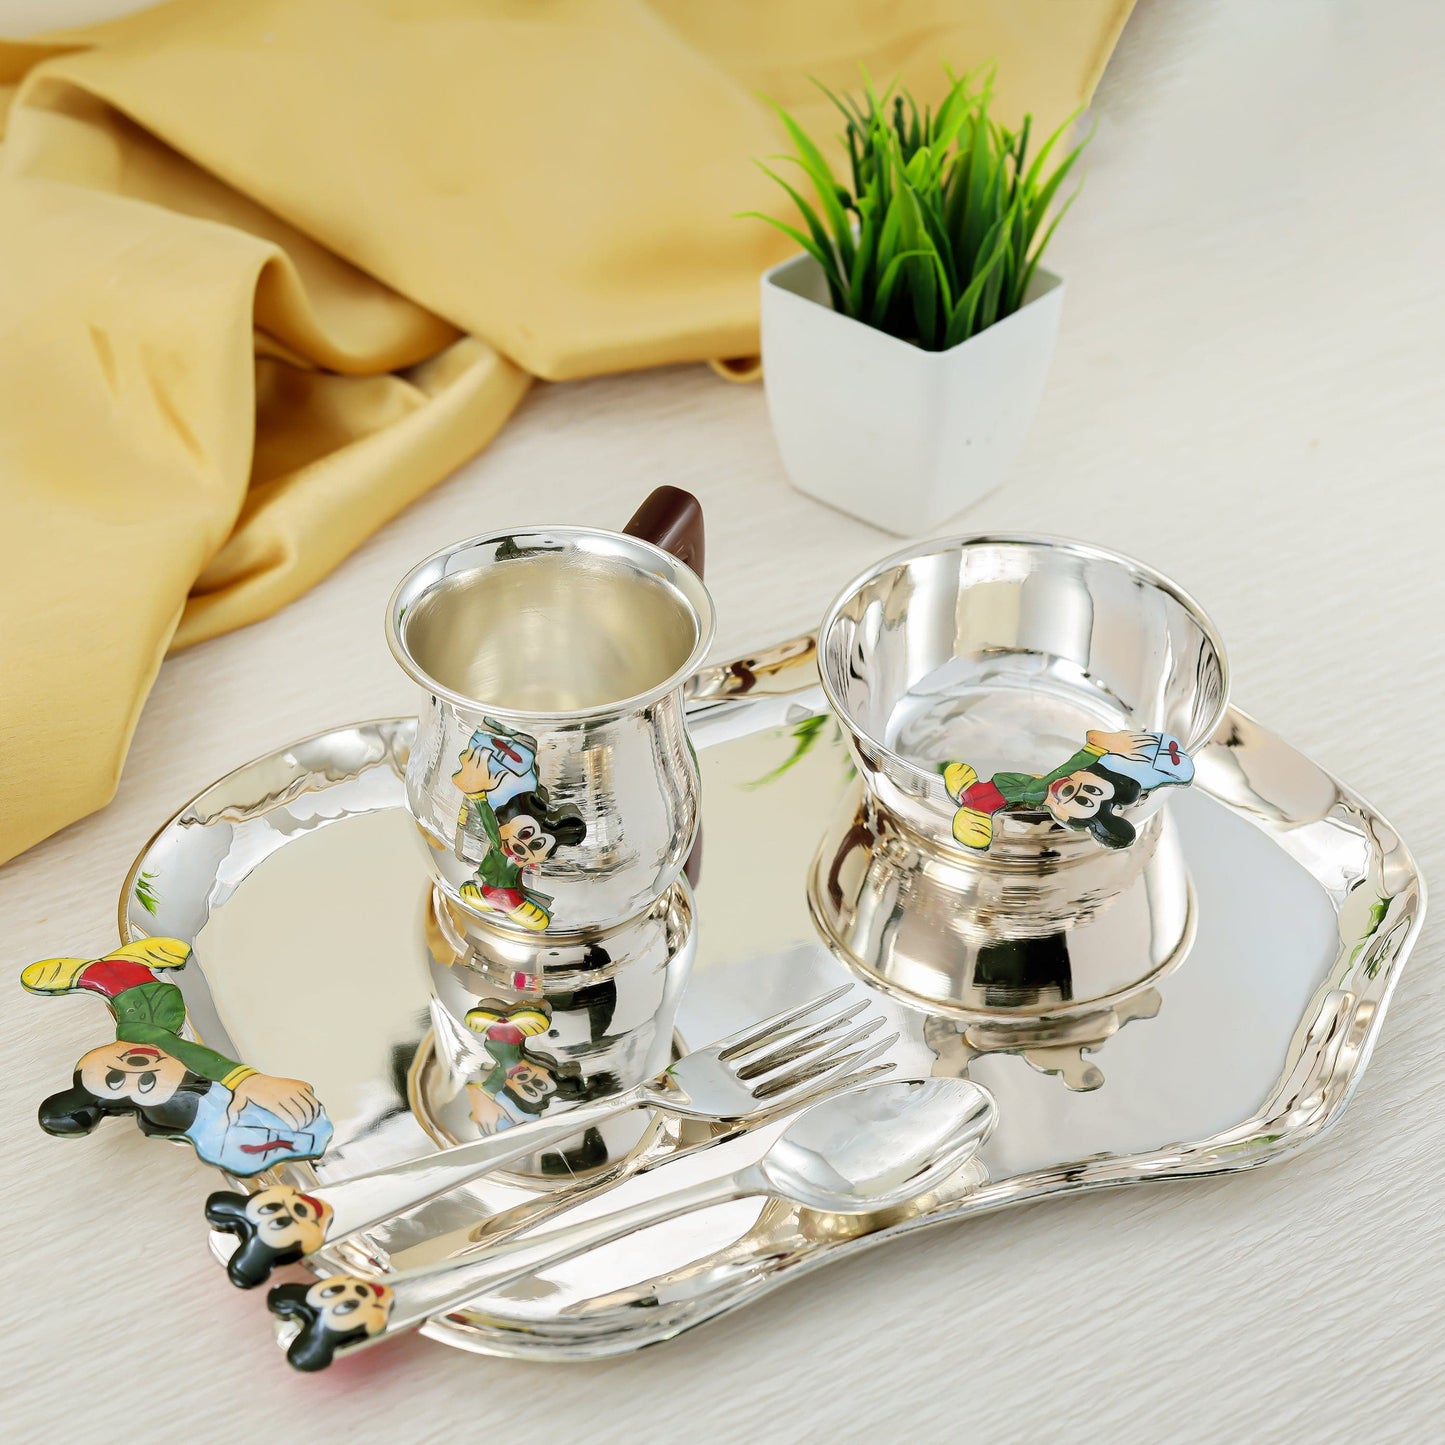 Lovely Silver Baby Meal Plate